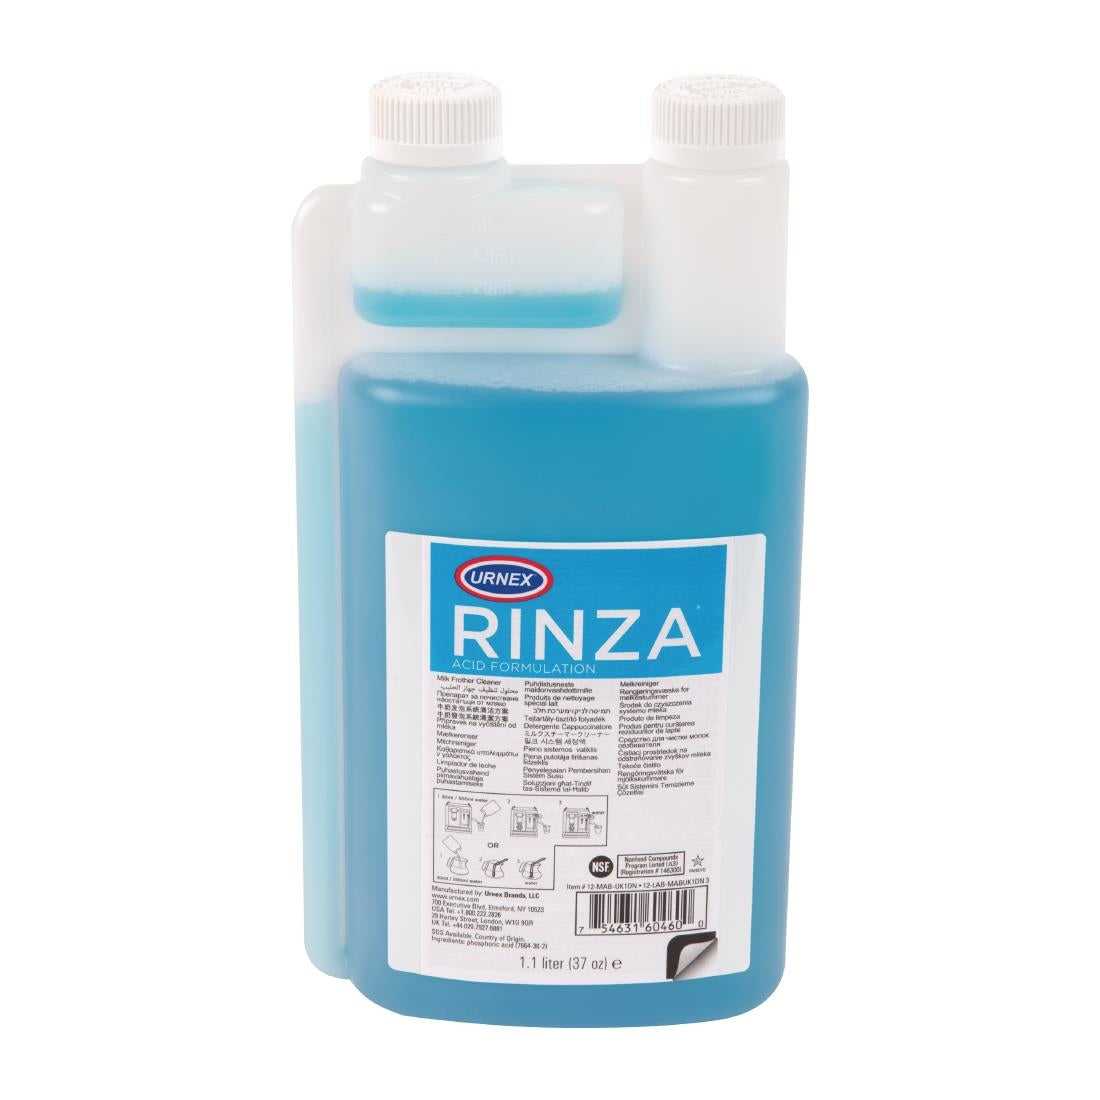 CX501 Urnex Rinza Acidic Milk Frother Cleaner Liquid Concentrate 1.1Ltr JD Catering Equipment Solutions Ltd